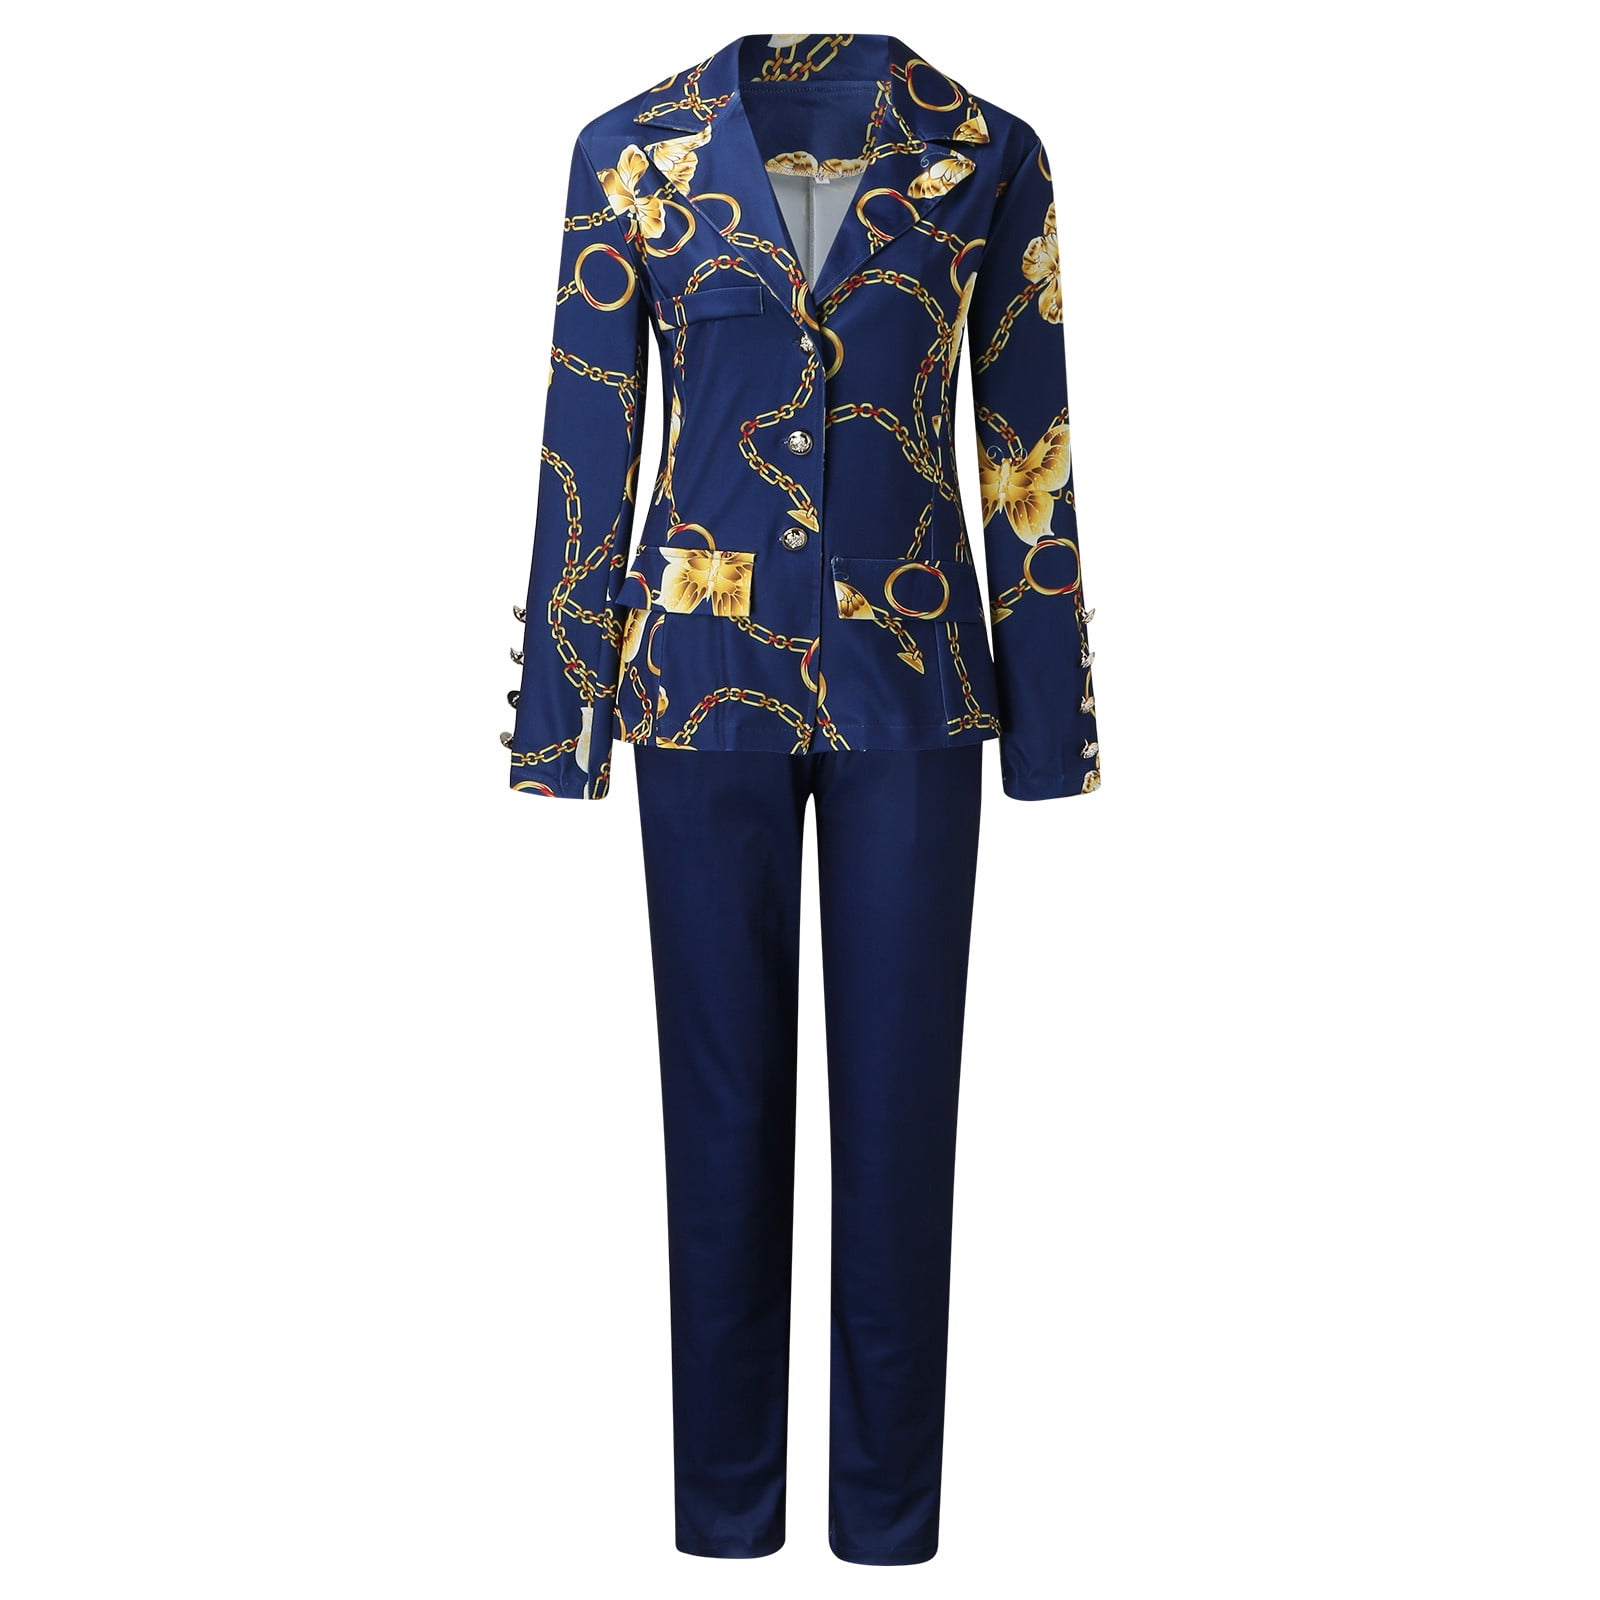 QNPQYX Womens Vintage Slim Business Lightweight Ladies Trouser Suits Suit  Elegant Office Blazer And Pantsuit For Casual And Fashionable Females From  Qnfy001, $28.14